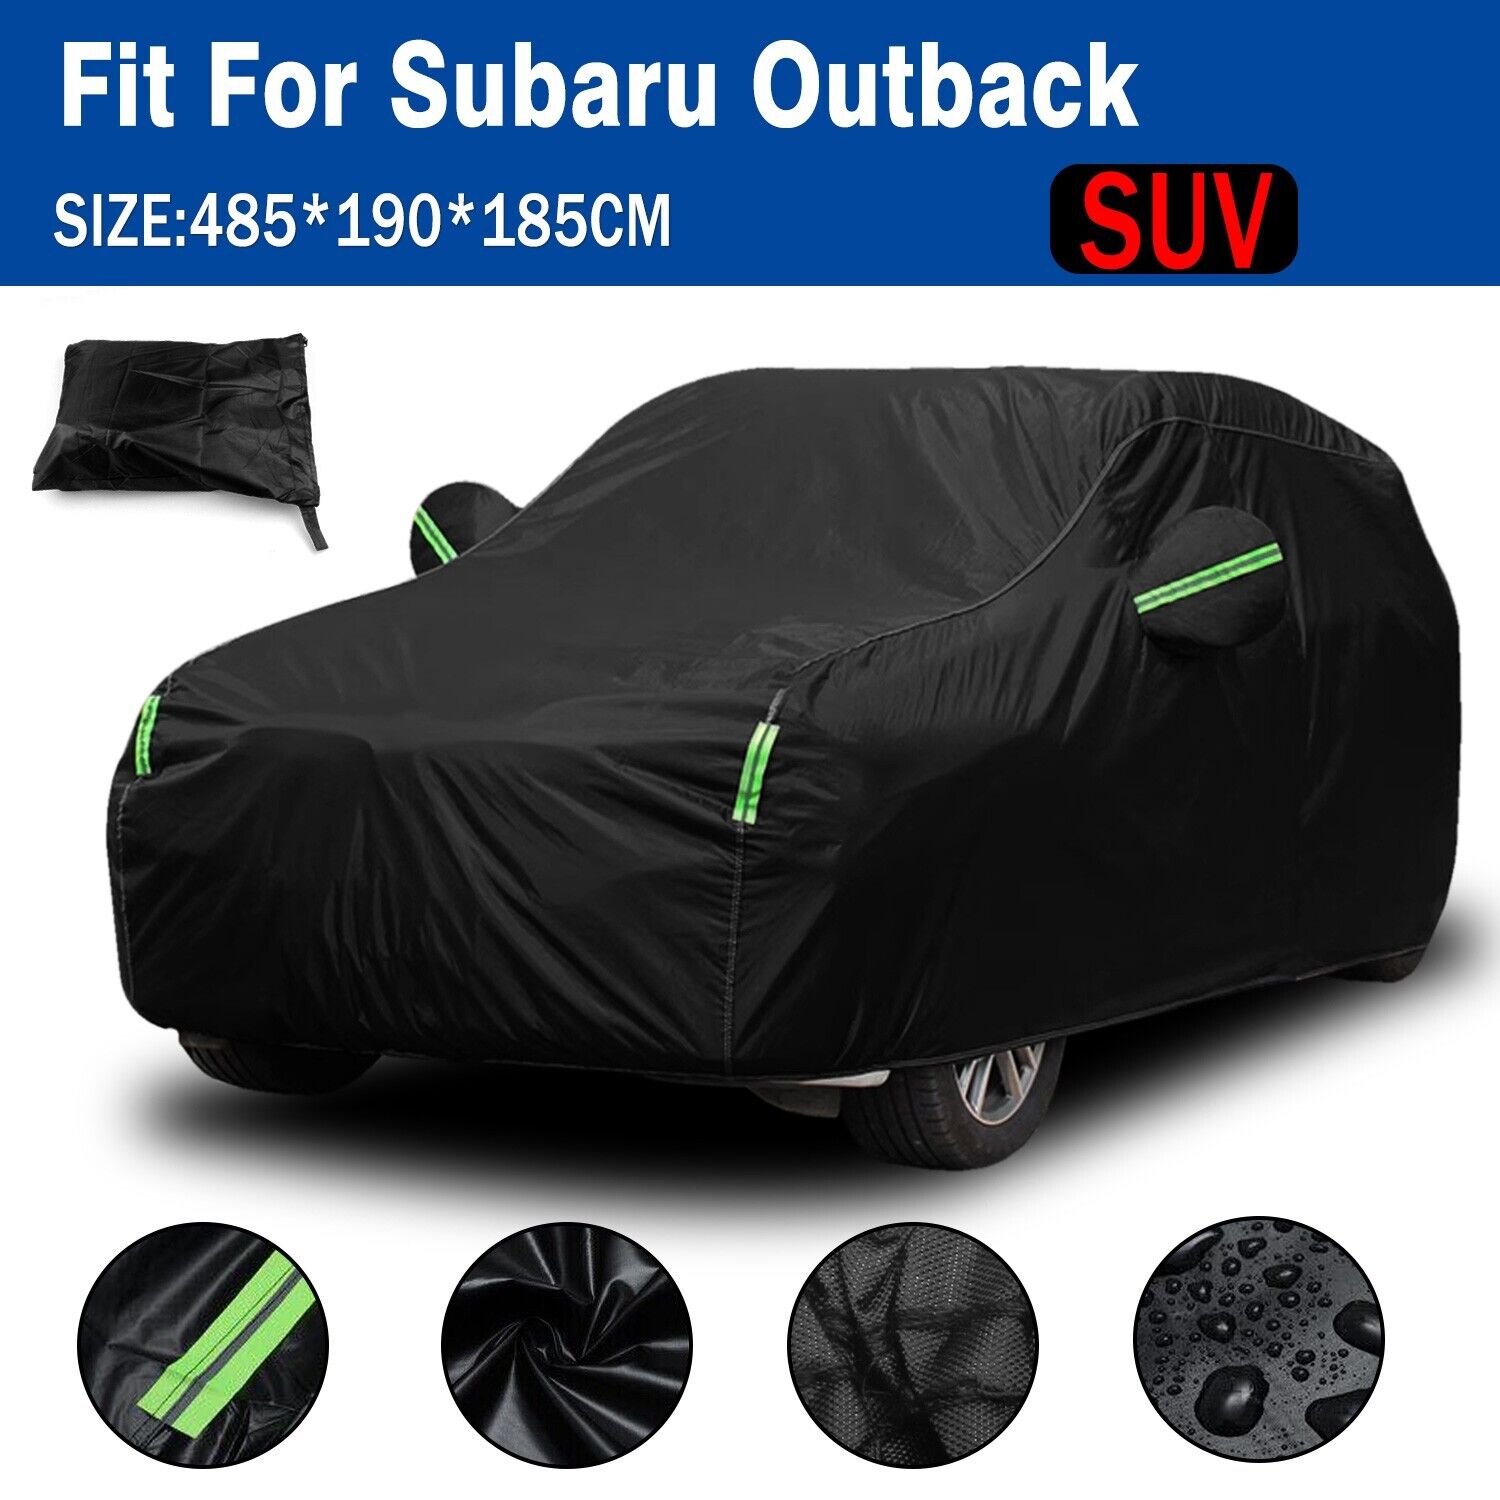 For Subaru Outback SUV Waterproof Full Car Cover Snow UV Resistant Protection